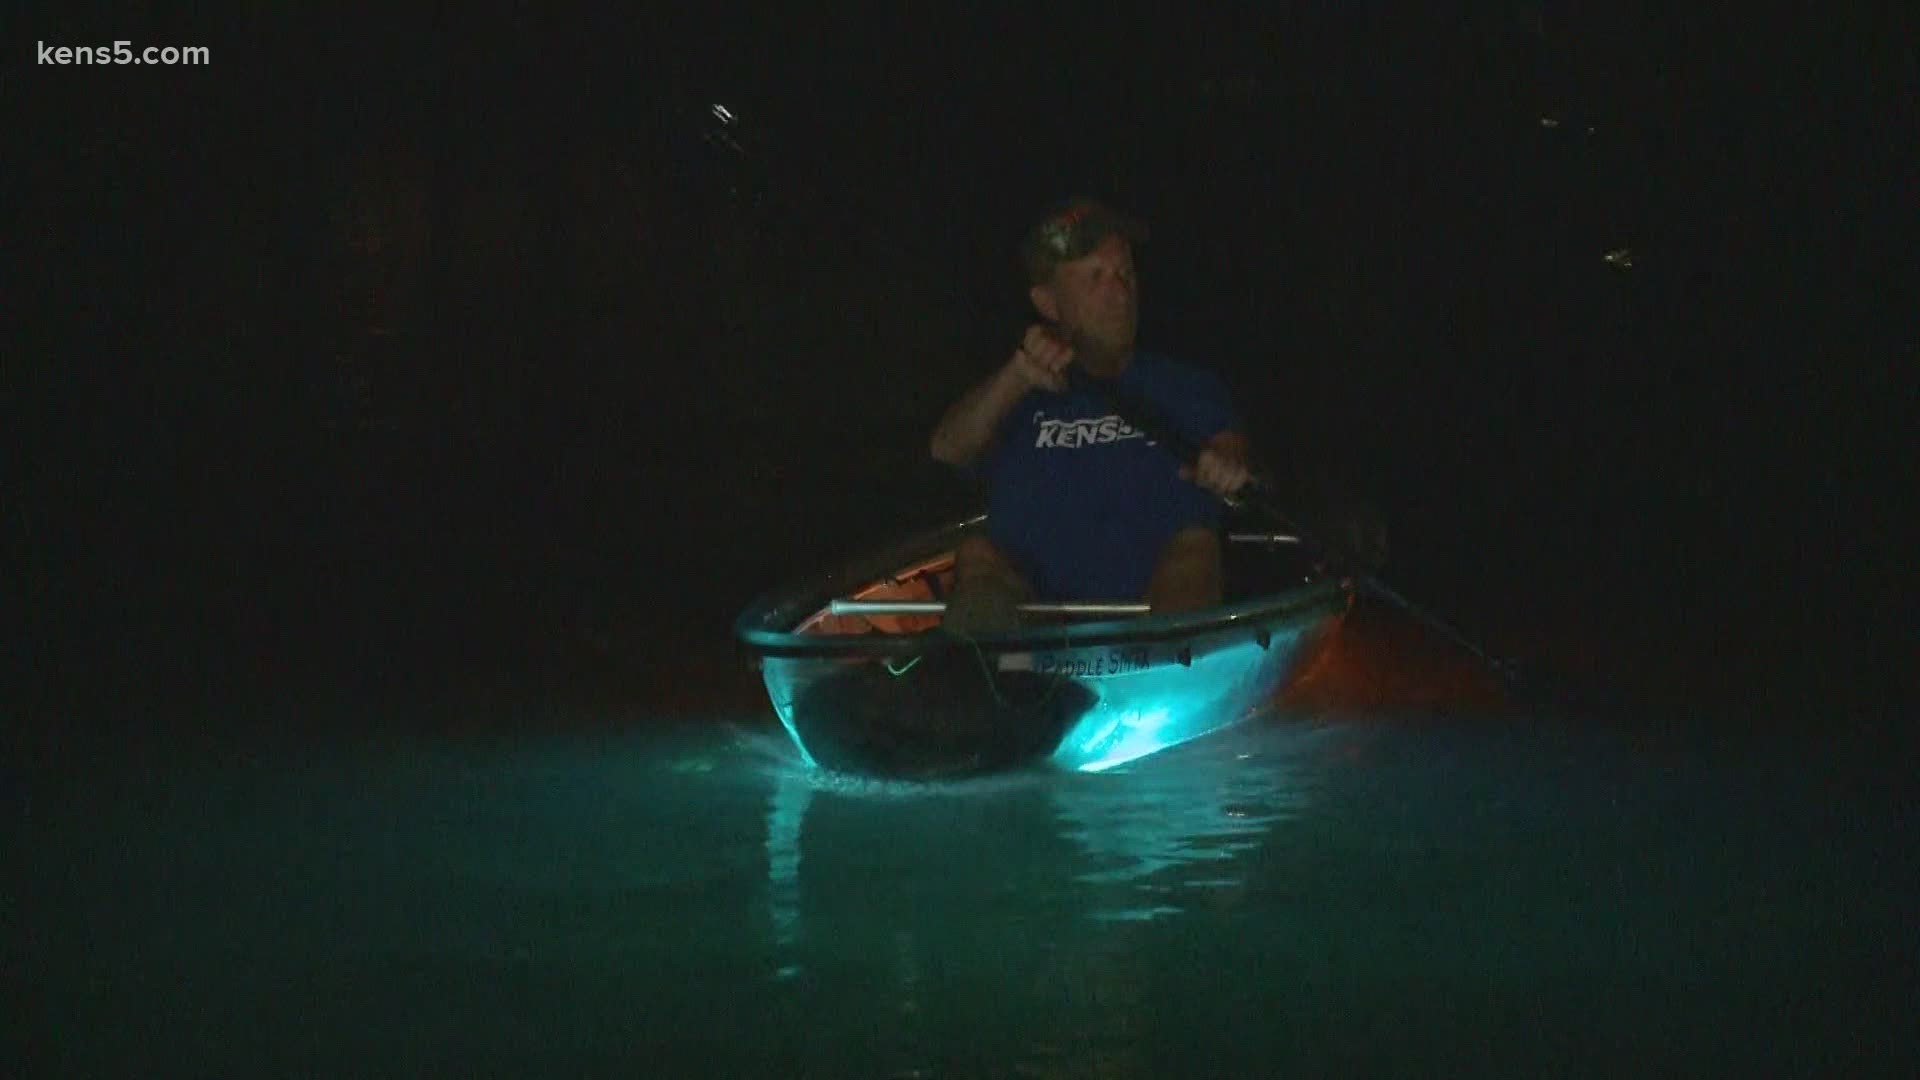 You wouldn’t normally think about kayaking the San Marcos River at night, but add some L.E.D. lights to a see through kayak and you have a great new experience.